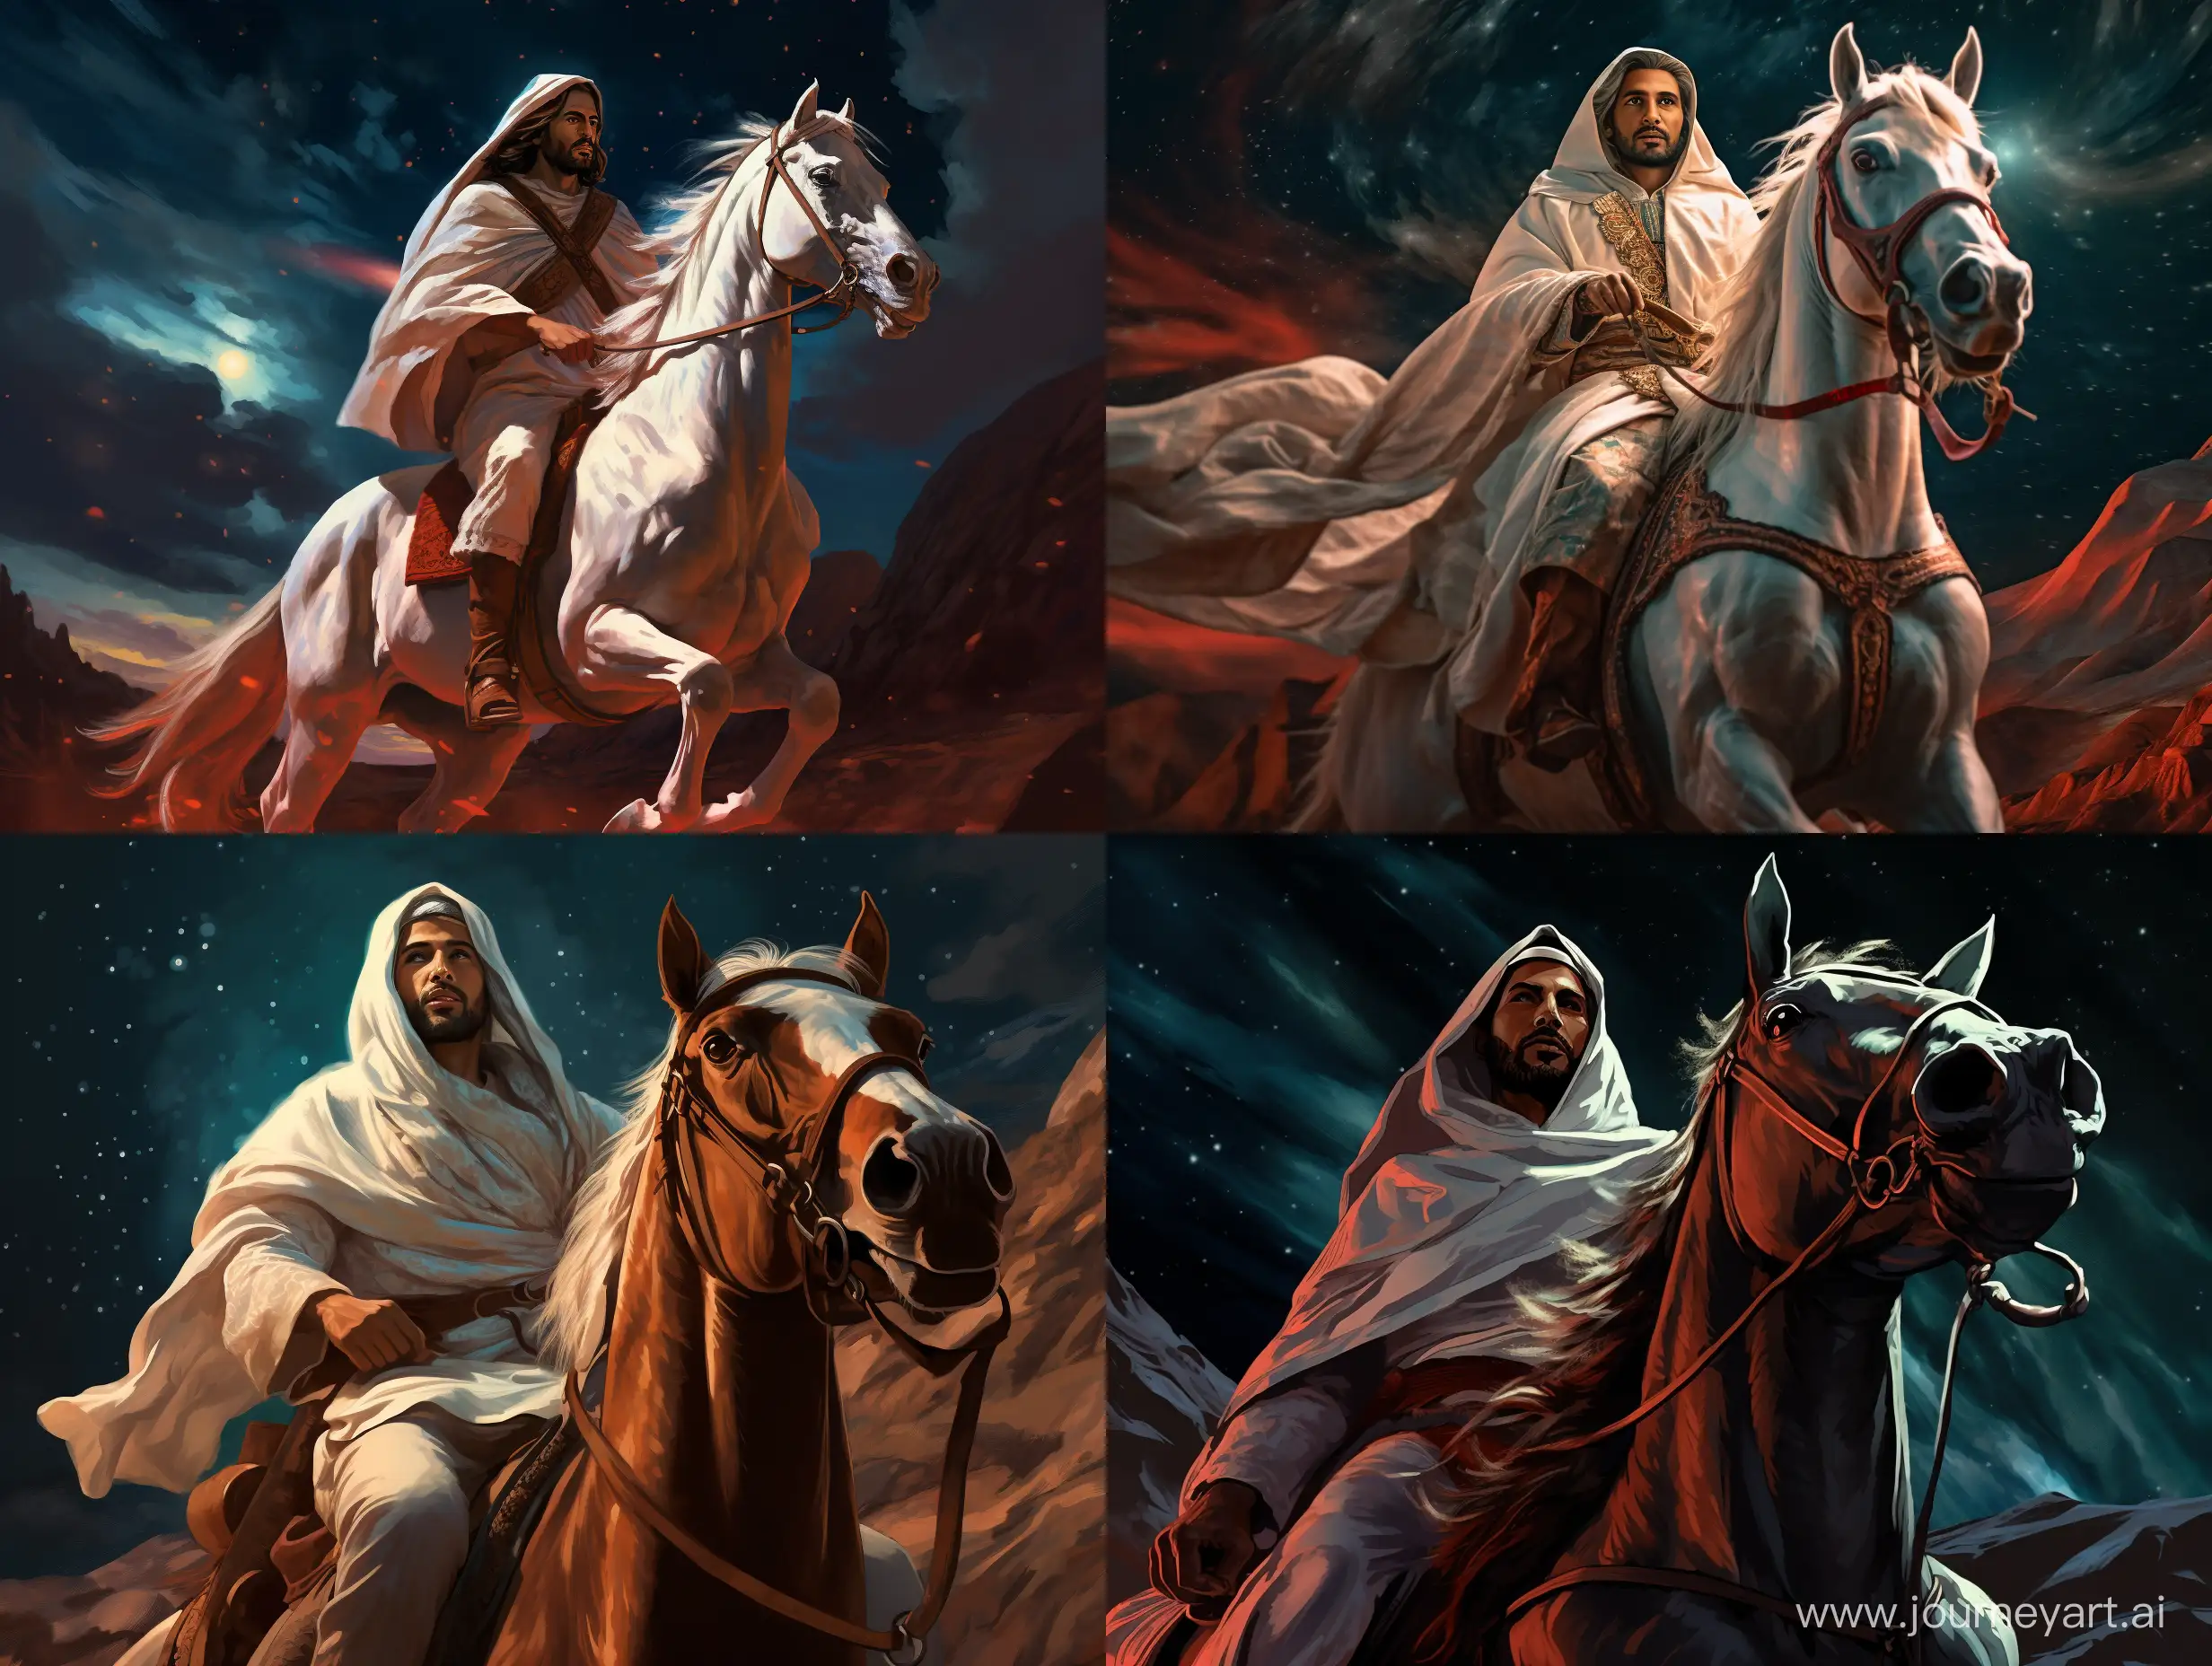 The opening image is of a Saudi prince wearing the traditional white Saudi dress and red shemagh, riding Arabian horses at night time and dim lighting, in a cinematic and dramatic style with shades of brown, and he appears confident of himself, the camera is at a low angle pointing upwards, the sky is blue, and a full-body shot